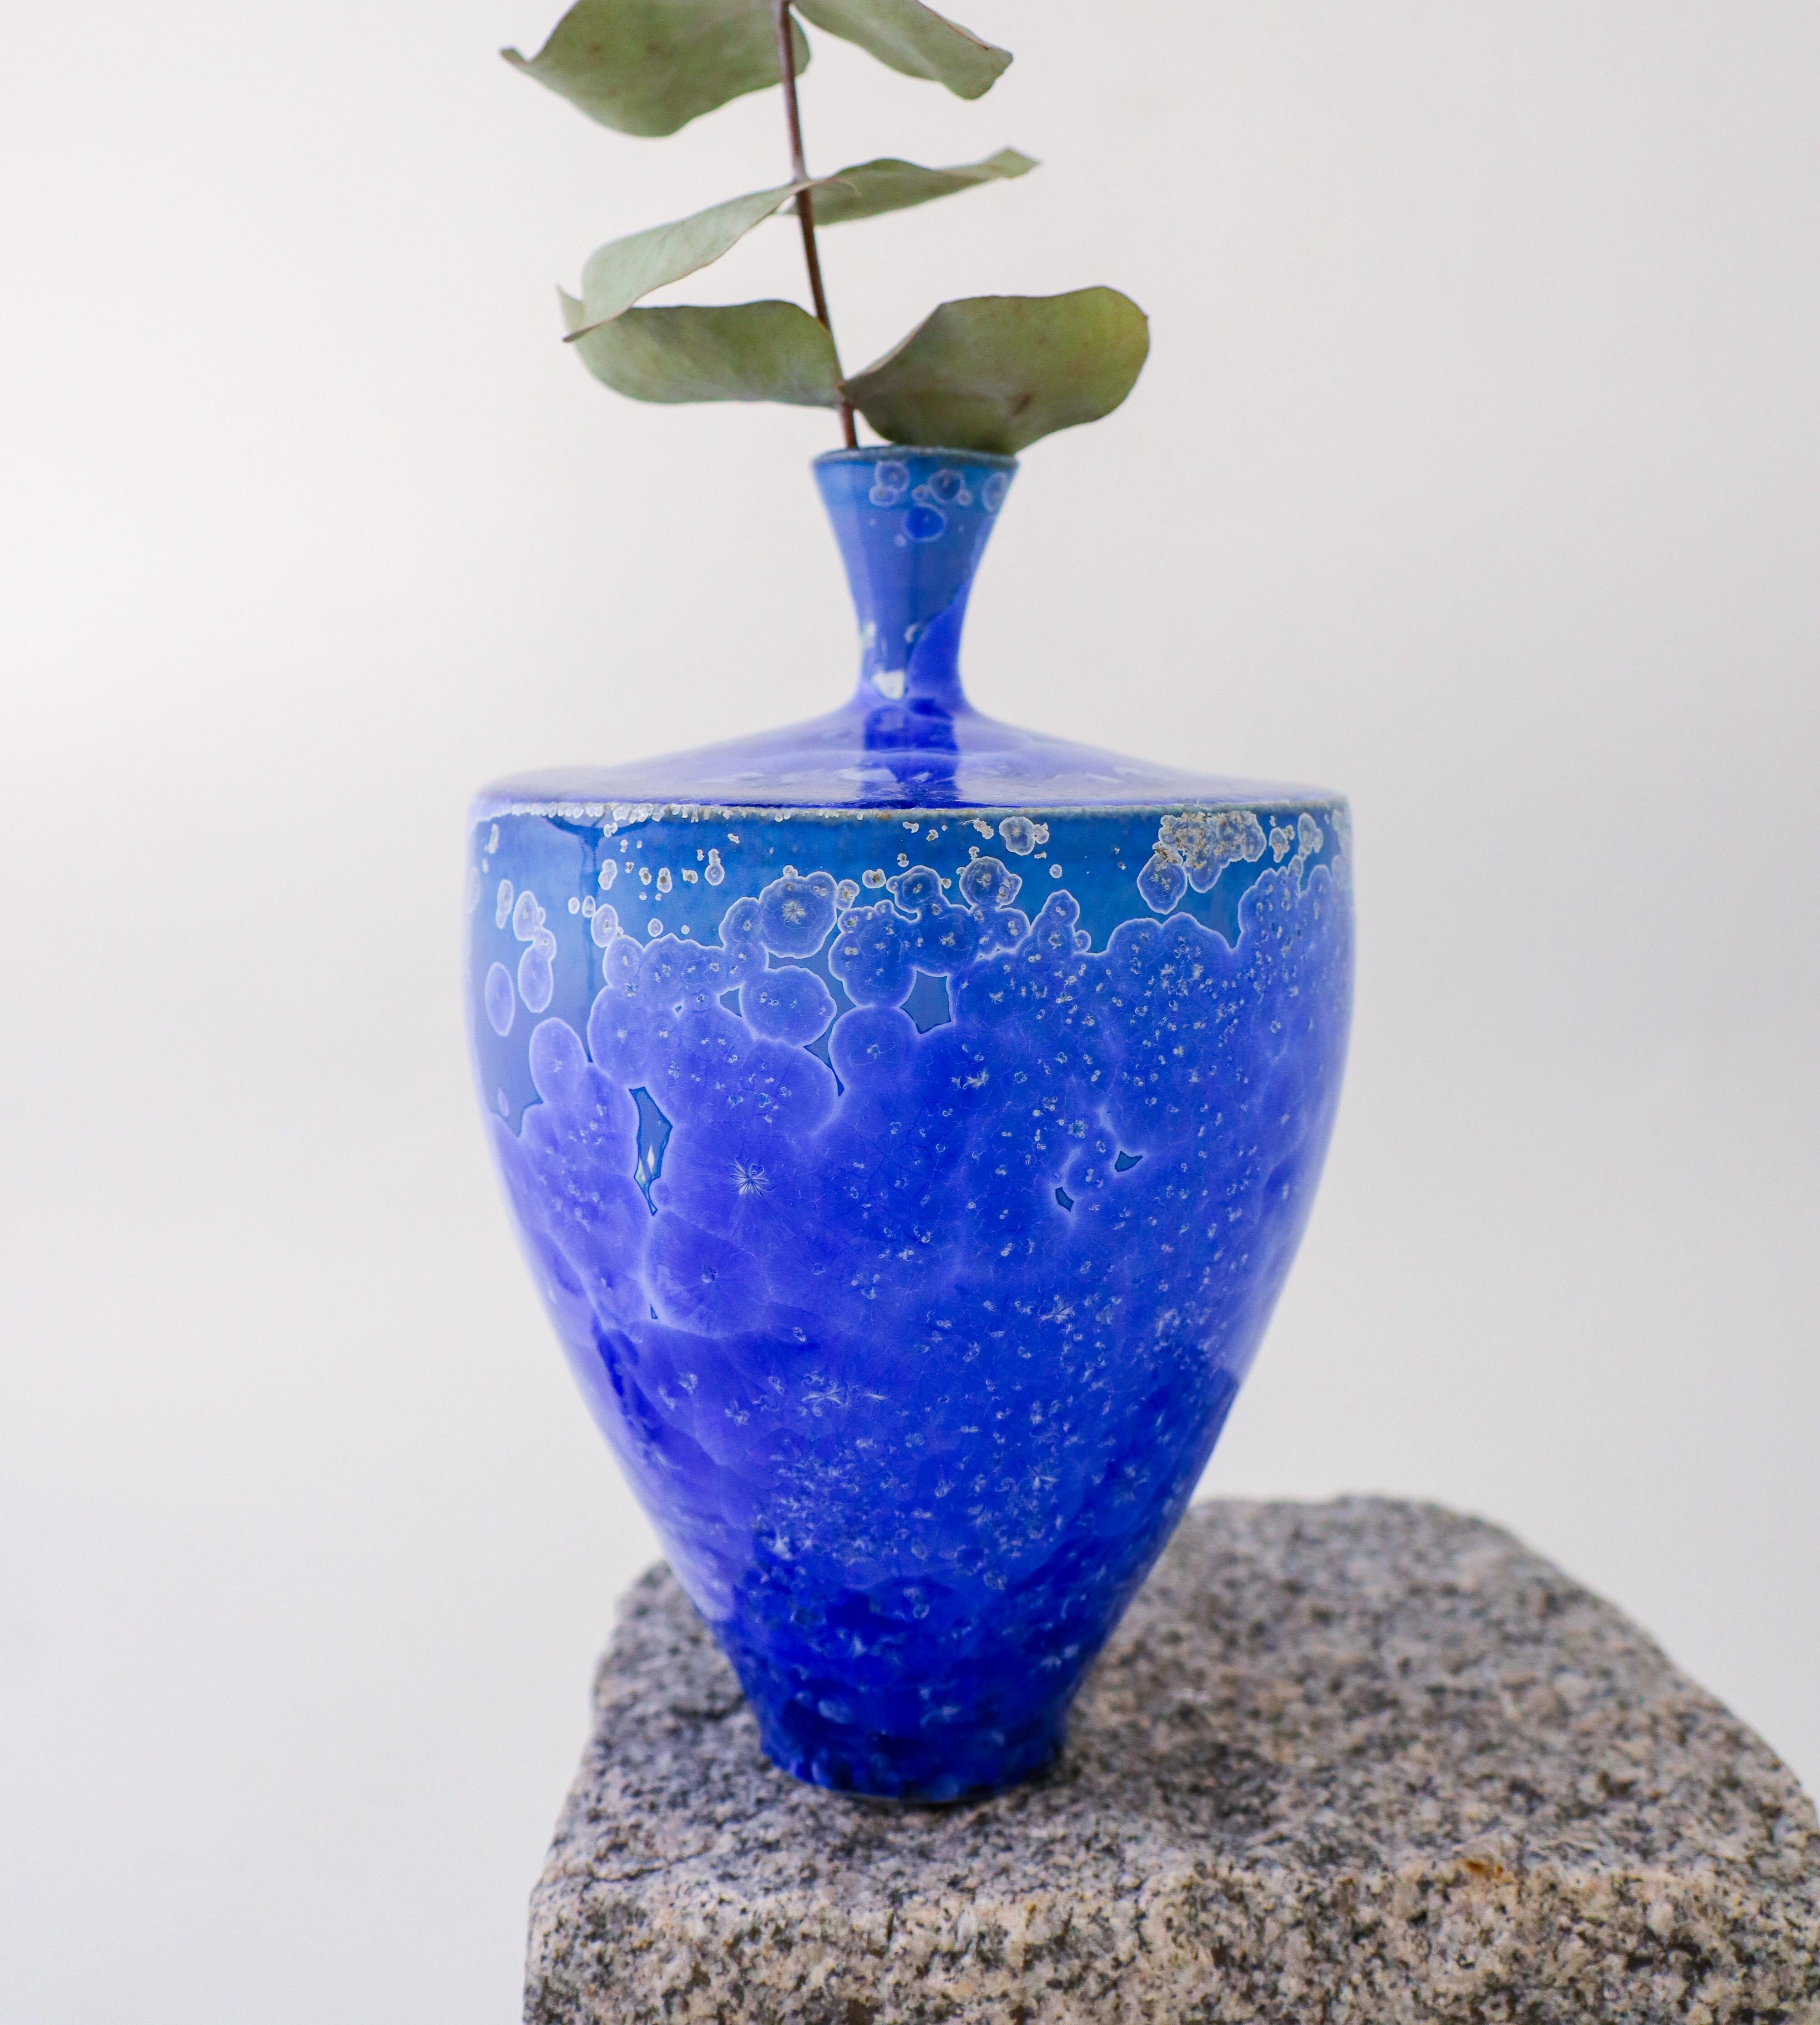 A deep blue vase with a lovely crystalline glaze designed by Isak Isaksson in Sweden. The vase is 18.5 cm (7.4